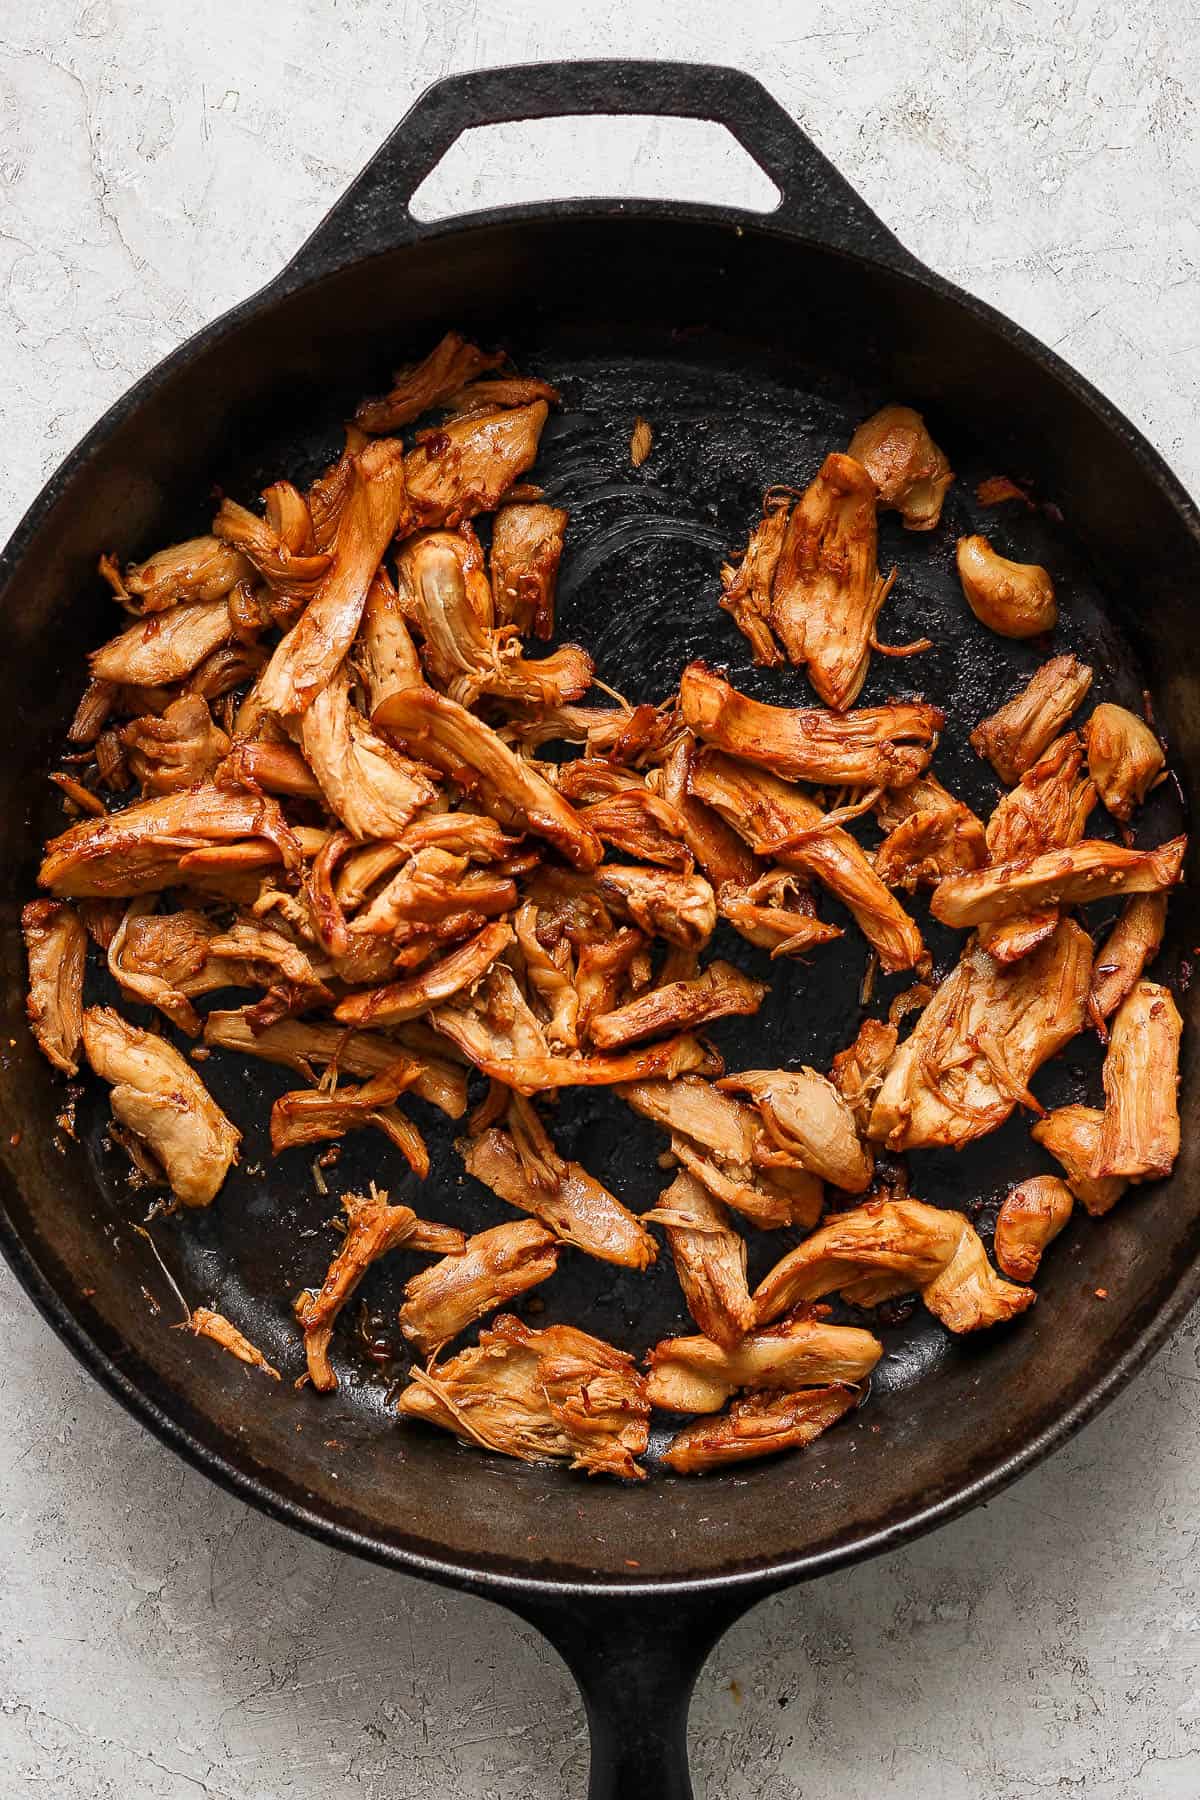 Mushrooms removed from the pan and shredded chicken has been added with some soy sauce, rice wine vinegar, and chili garlic sauce.